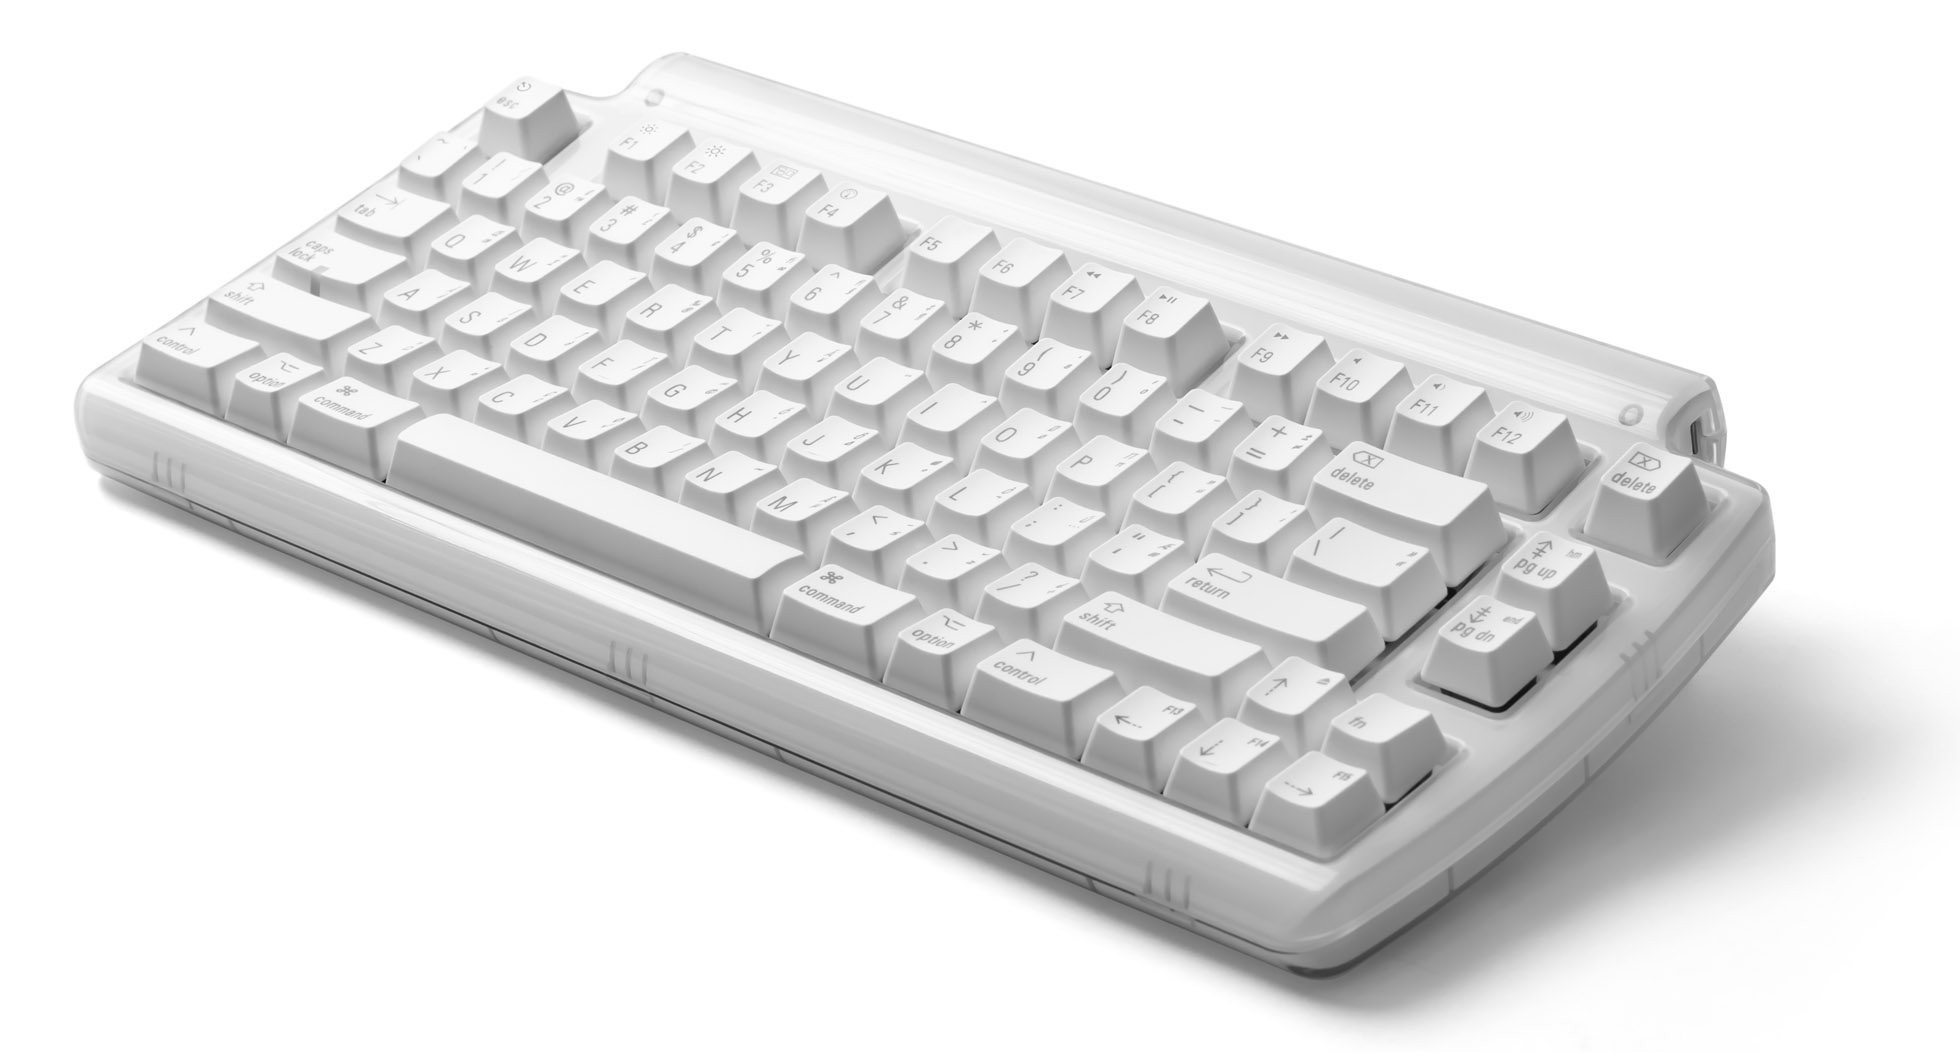 best keyboard and mouse for mac mini